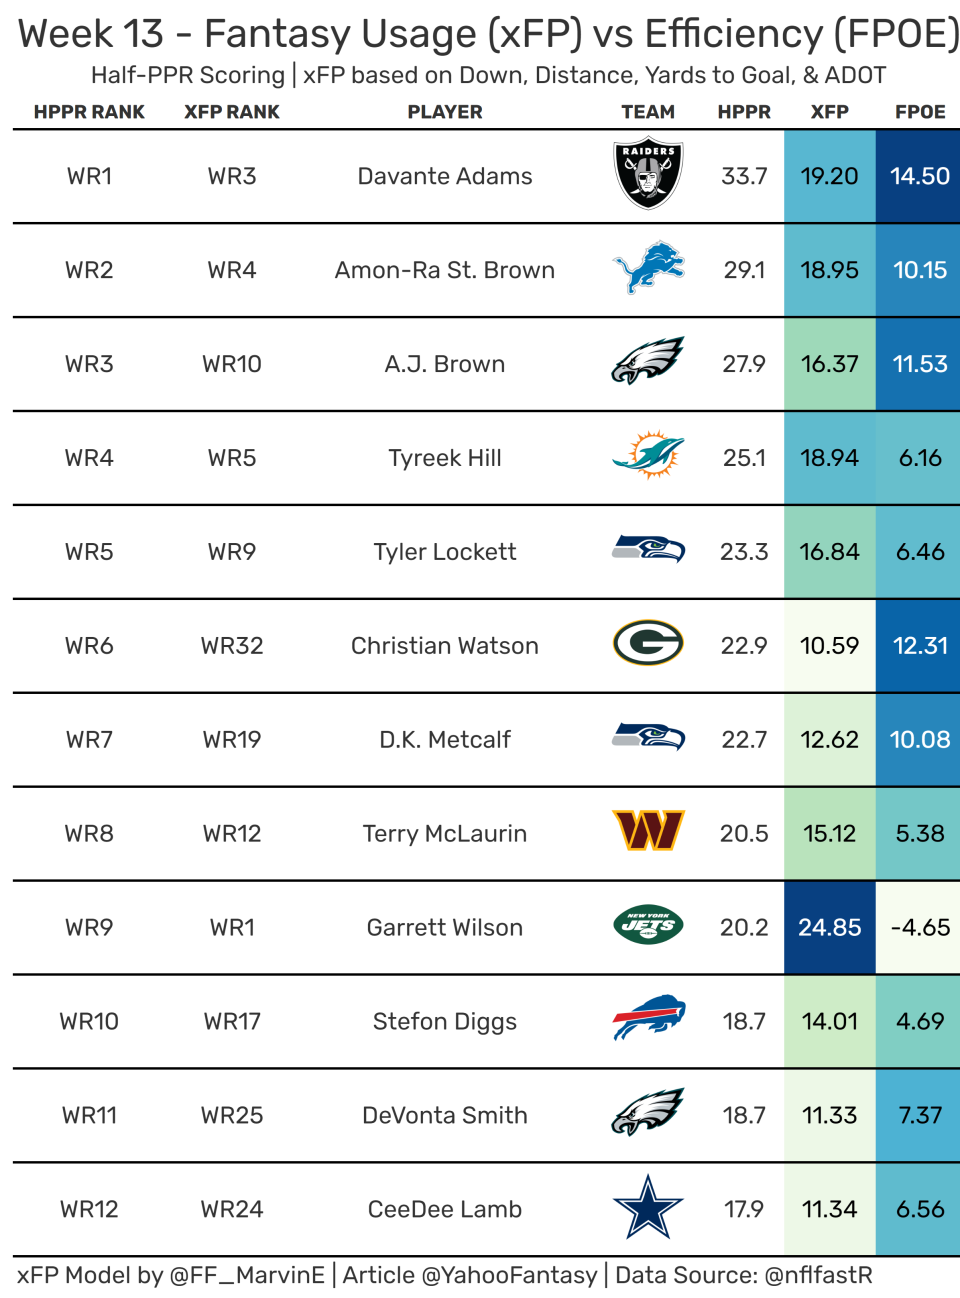 Top-12 Fantasy Wide Receivers from Week 13. (Data used provided by nflfastR)